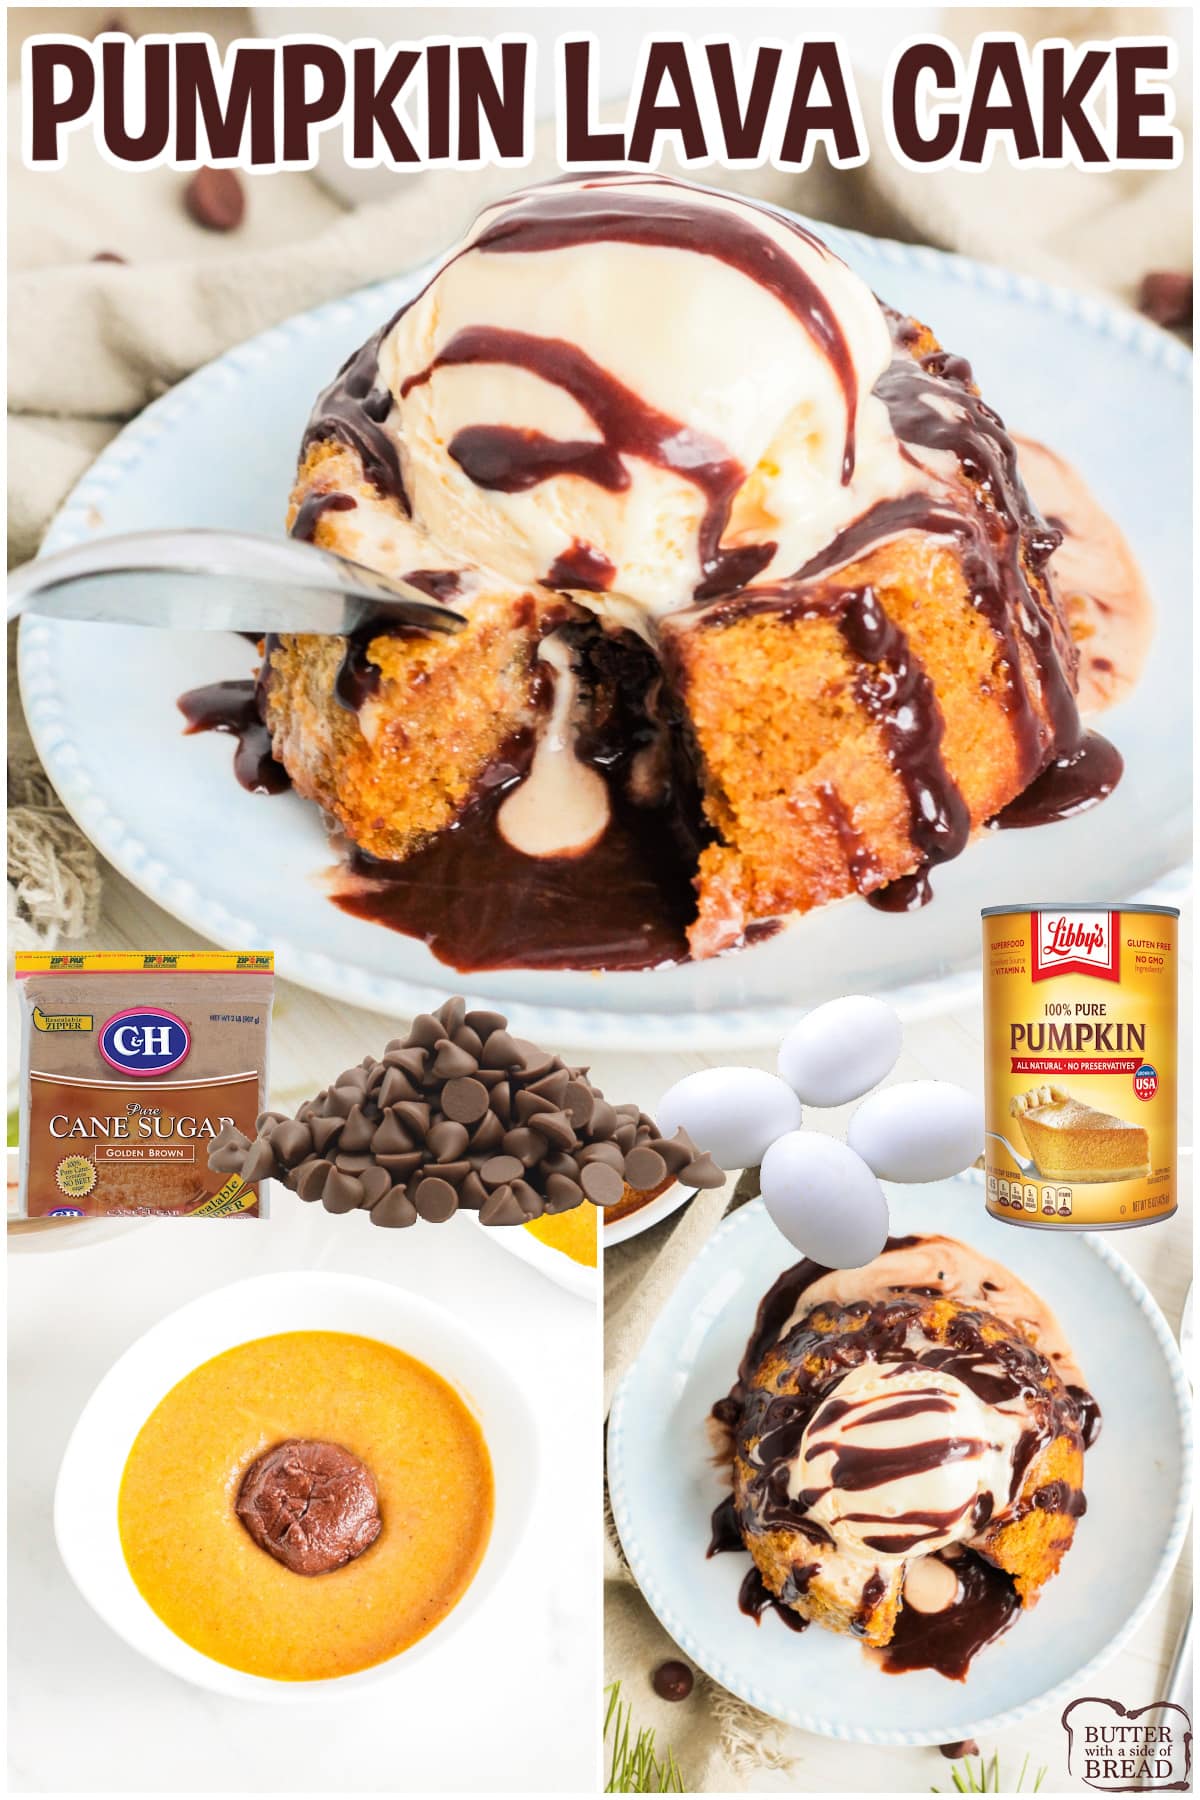 Pumpkin Lava Cake is a decadent pumpkin cake filled with a gooey chocolate ganache. Made completely from scratch, this pumpkin lava cake recipe is absolutely delicious!